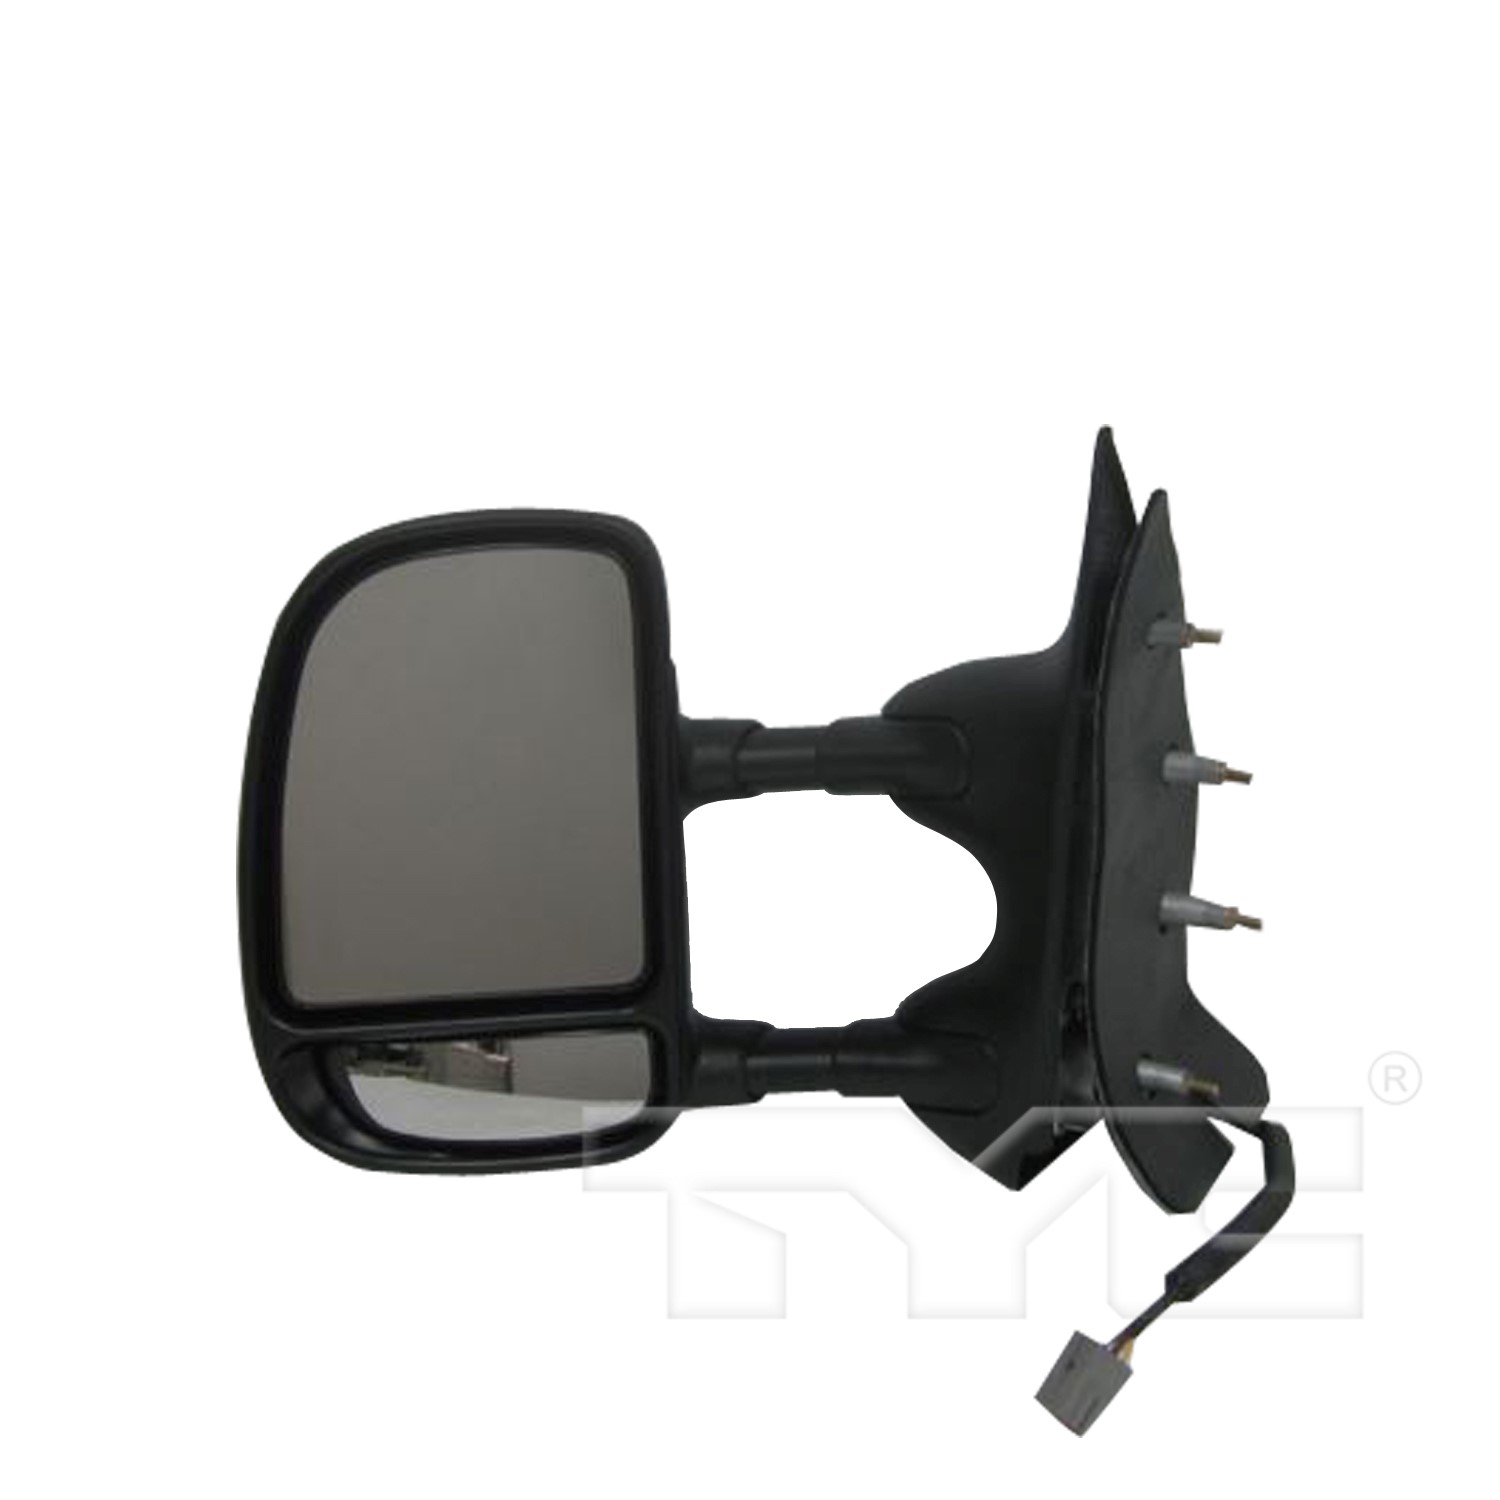 Aftermarket MIRRORS for FORD - E-150, E-150,09-14,LT Mirror outside rear view